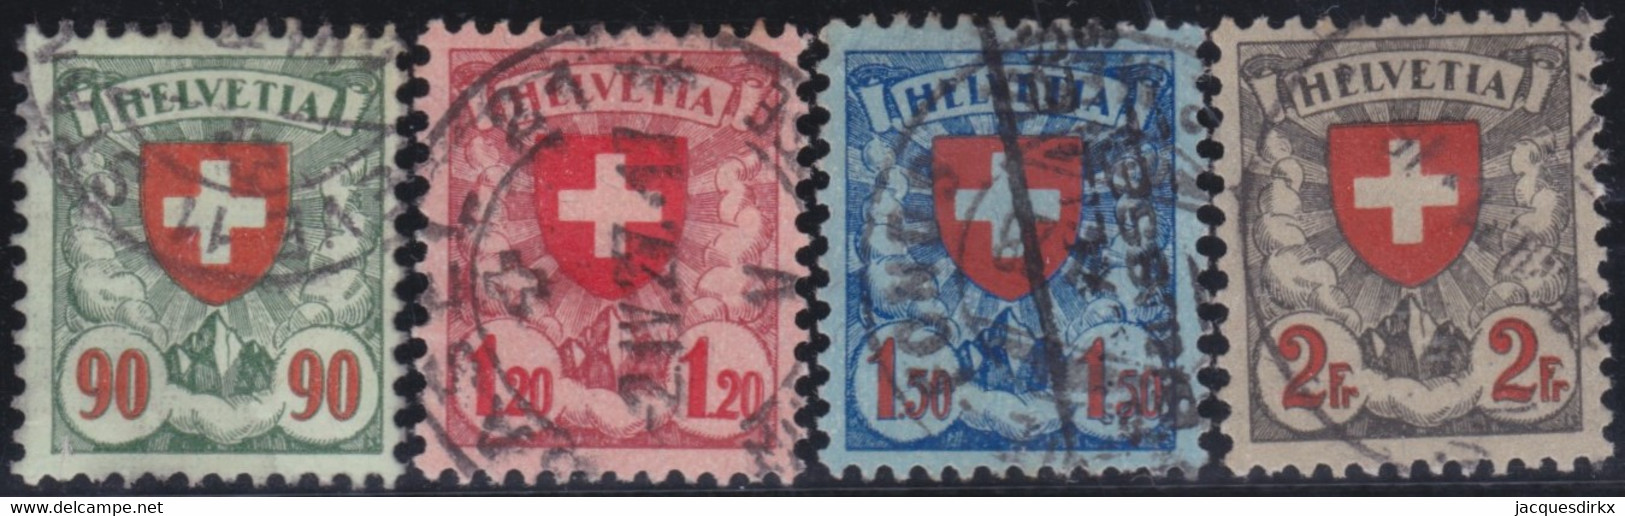 Suisse    .   Y&T   .   208/211        .      O         .      Oblitéré   .   /     .   Cancelled - Used Stamps